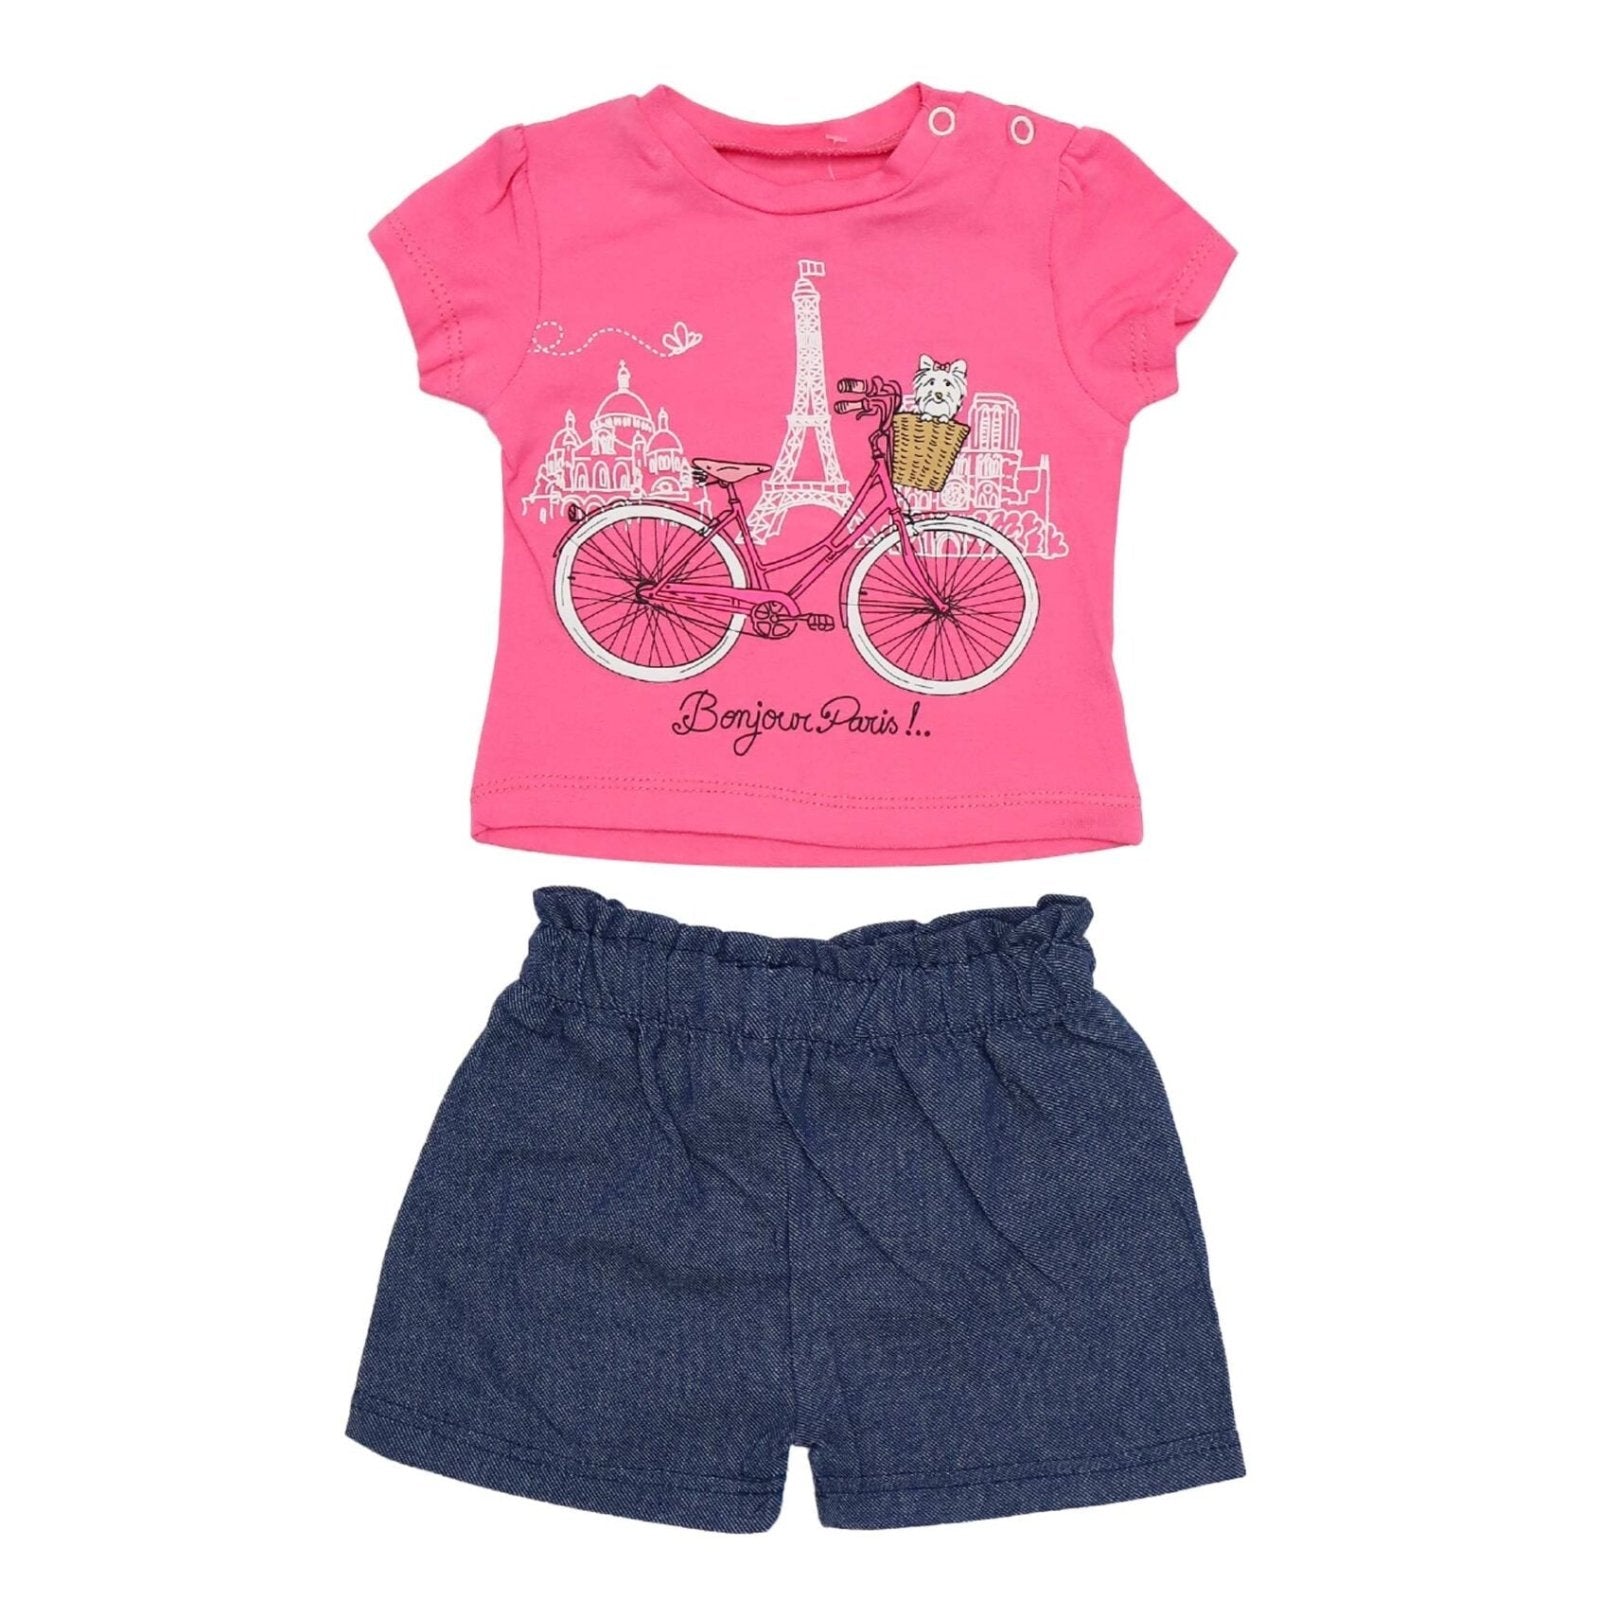 Girls Suit Bonjour Paris Print Pink Color by Made In Turkey